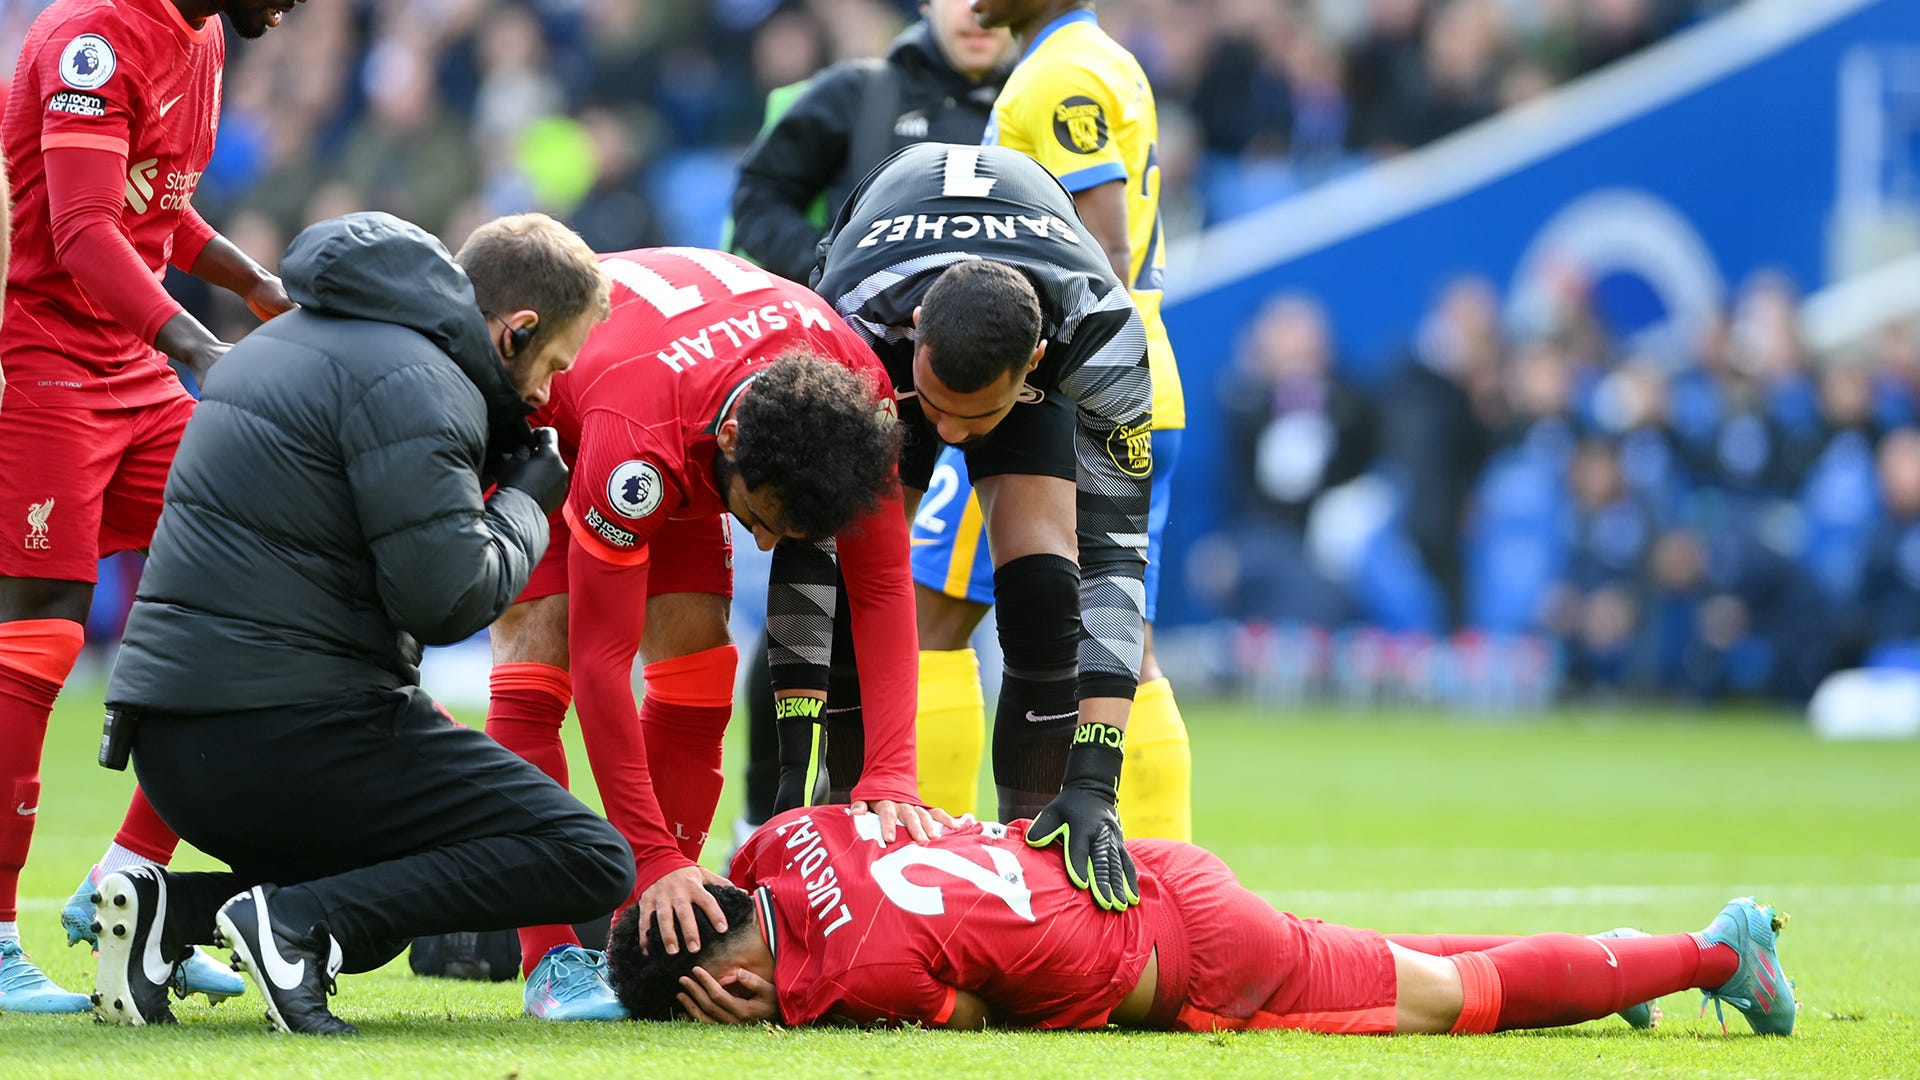 Liverpool winger Luis Diaz wiped out by Brighton goalkeeper Robert Sanchez  as he scored opening goal - so why didn't VAR issue a red card?